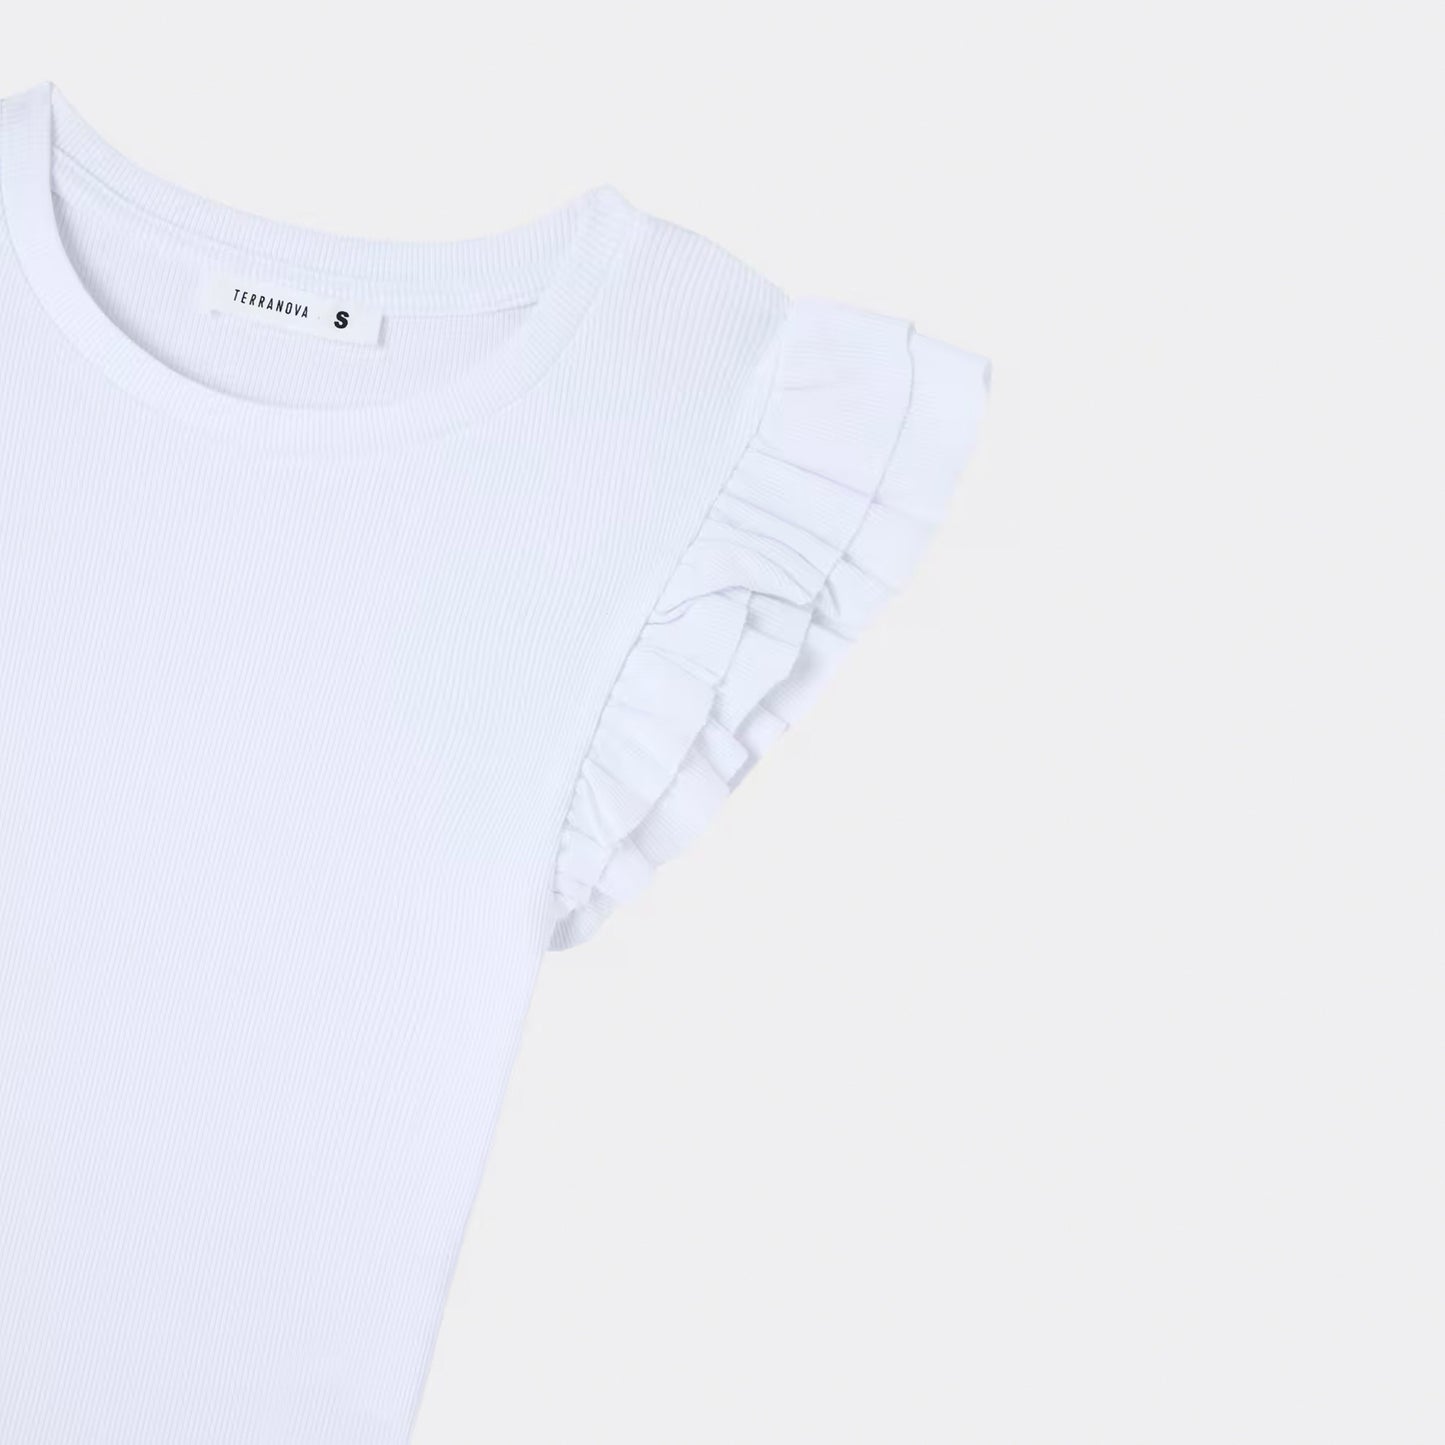 Cropped Crew Neck T-Shirt